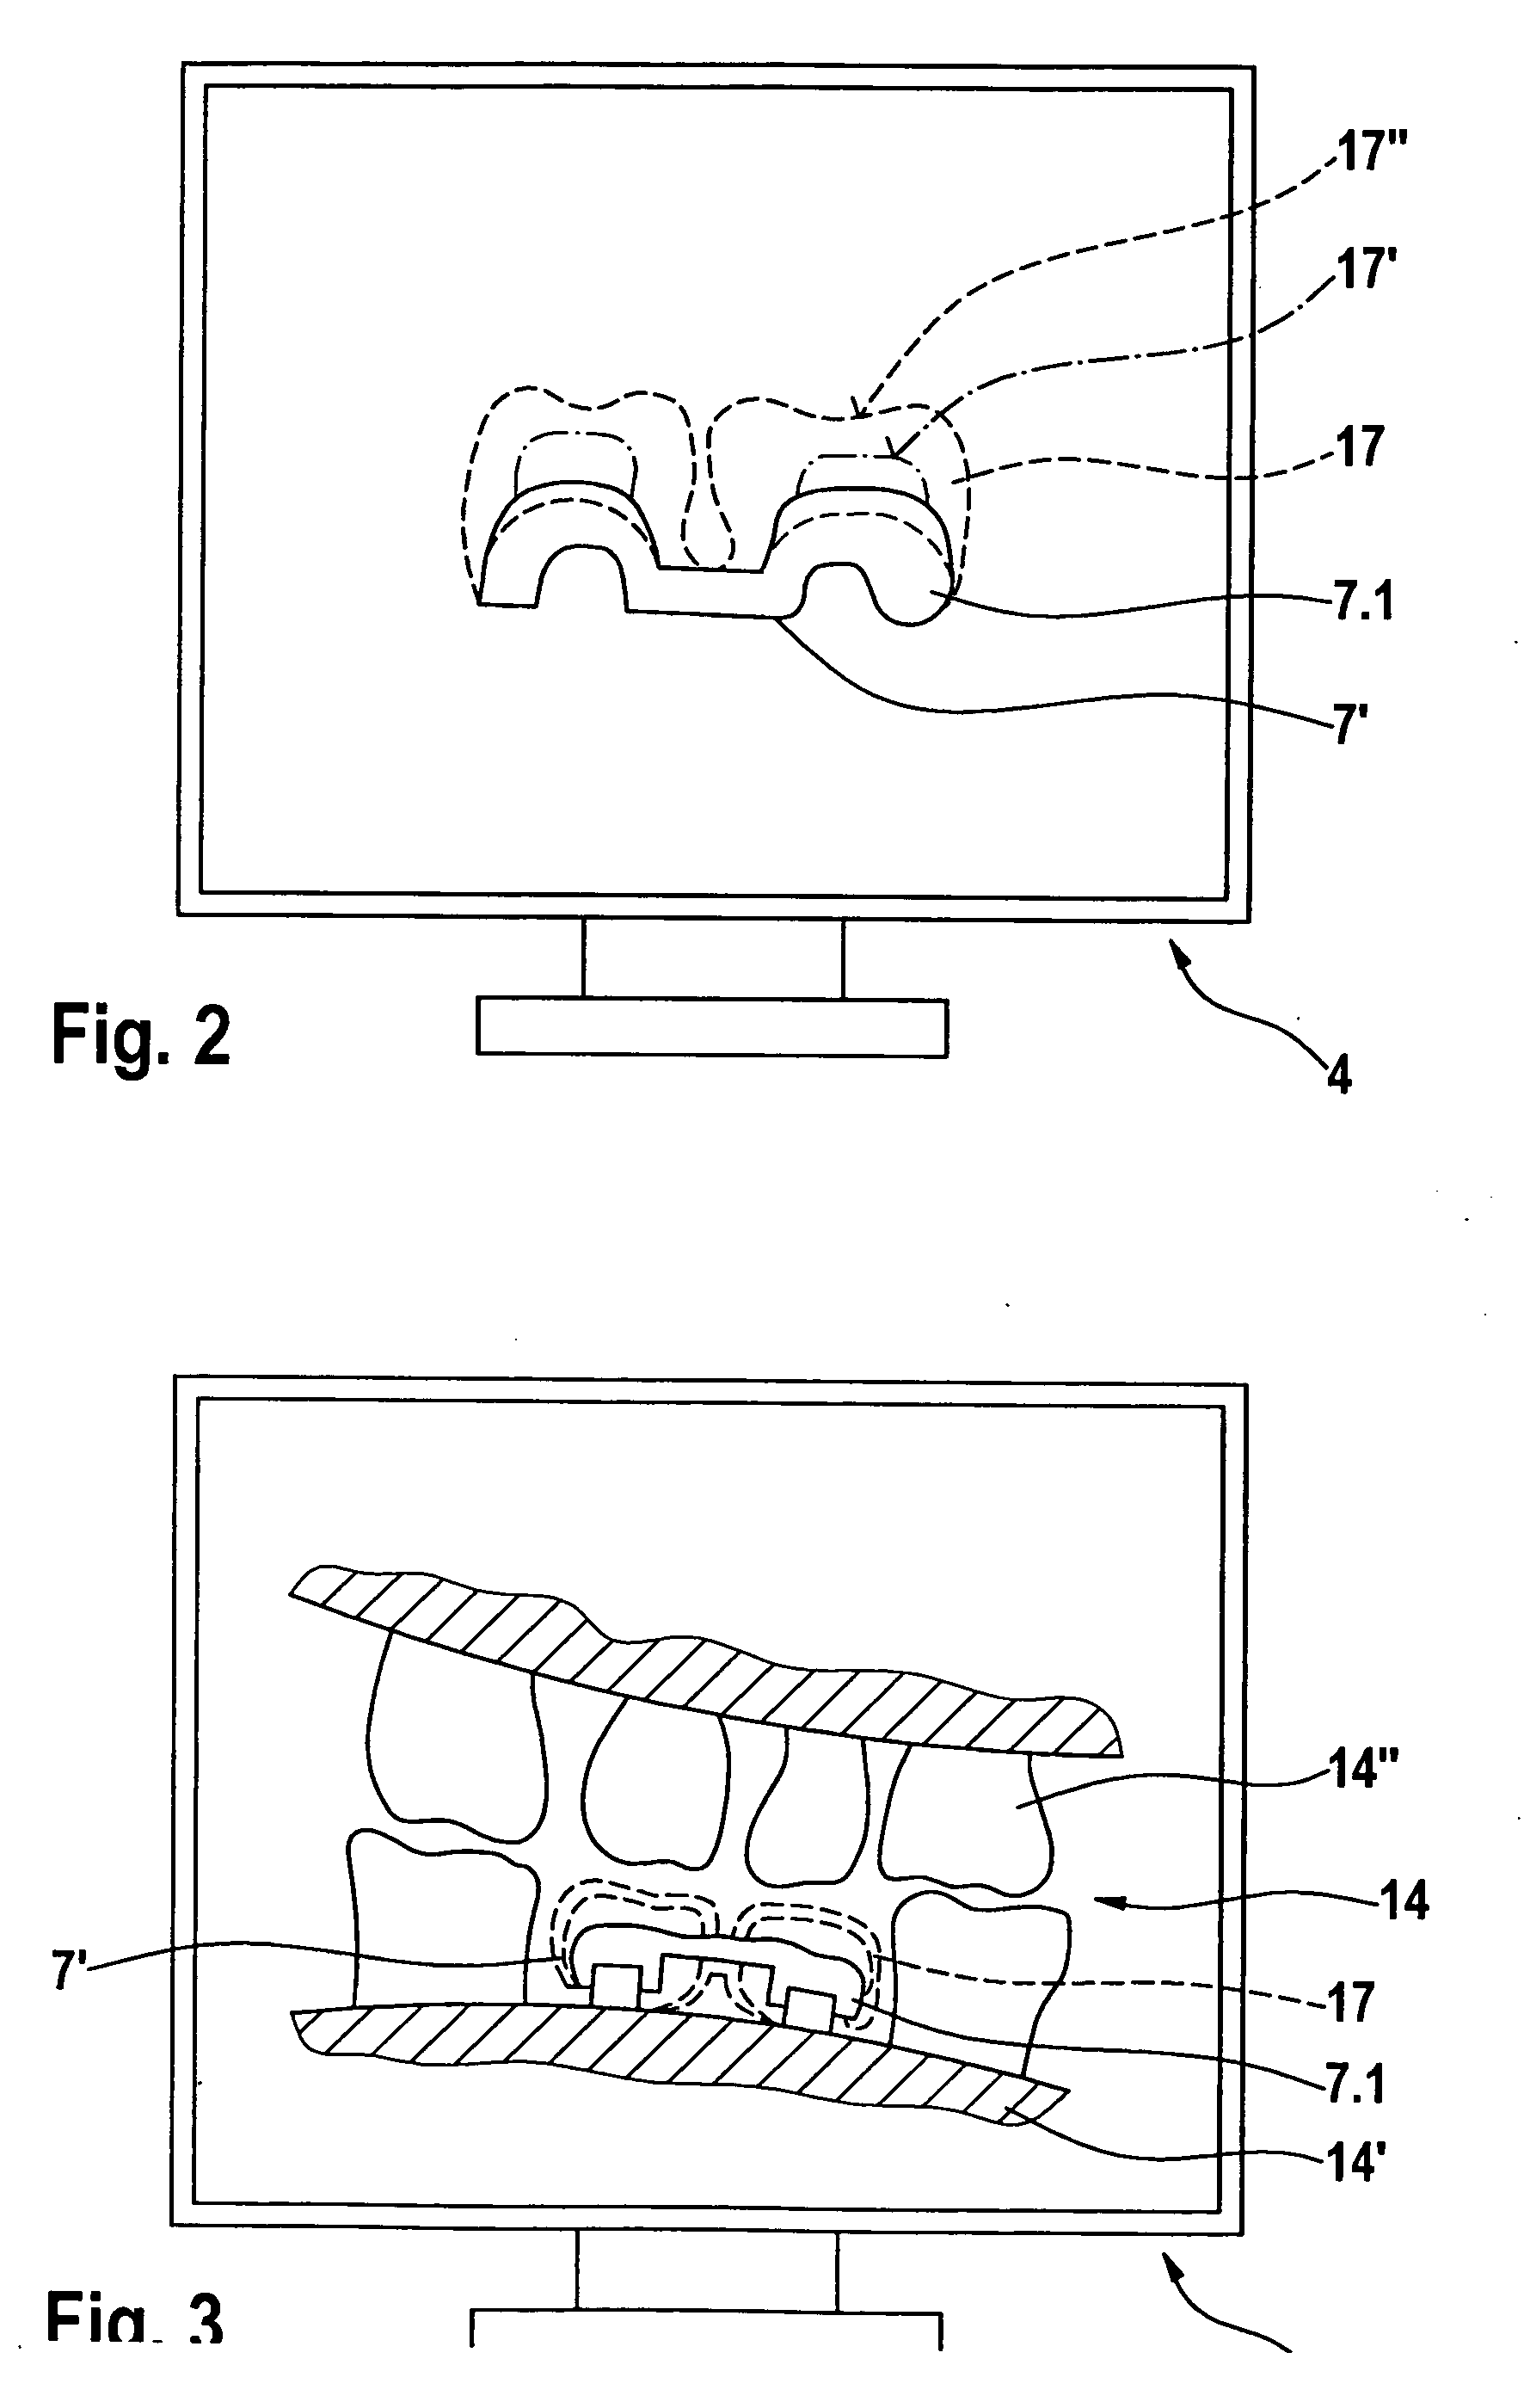 Method and Device for Producing Dental Prosthesis Elements